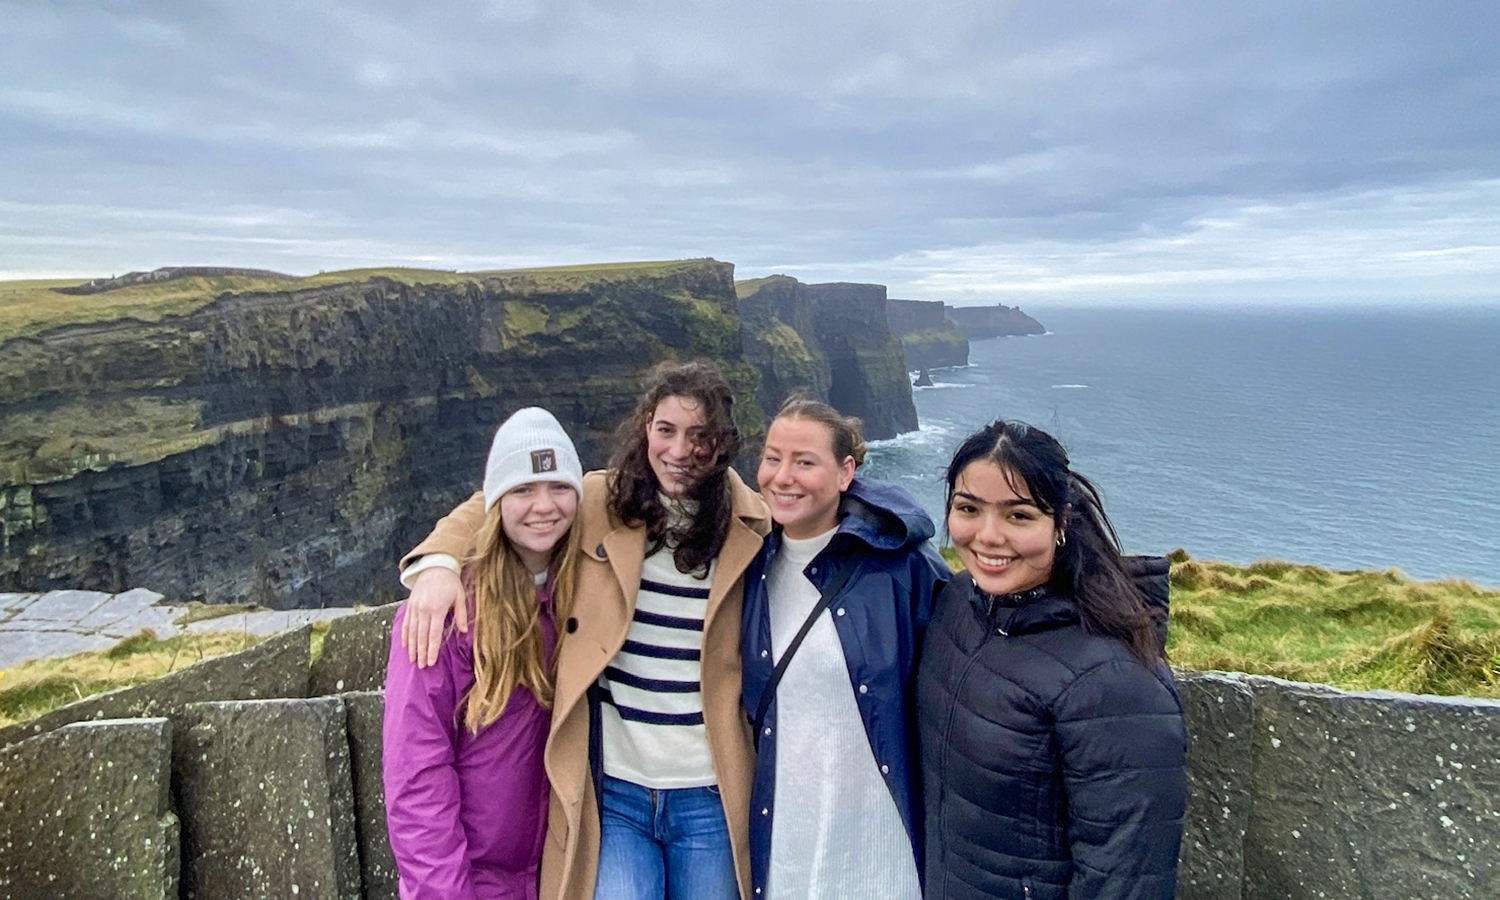 In Galway, Ireland, Annette Stephens ’24, Molly Trunfio ’24, Ella Weiss ’24 and Brenda Plascienda ’24 take in the Cliffs of Moher.